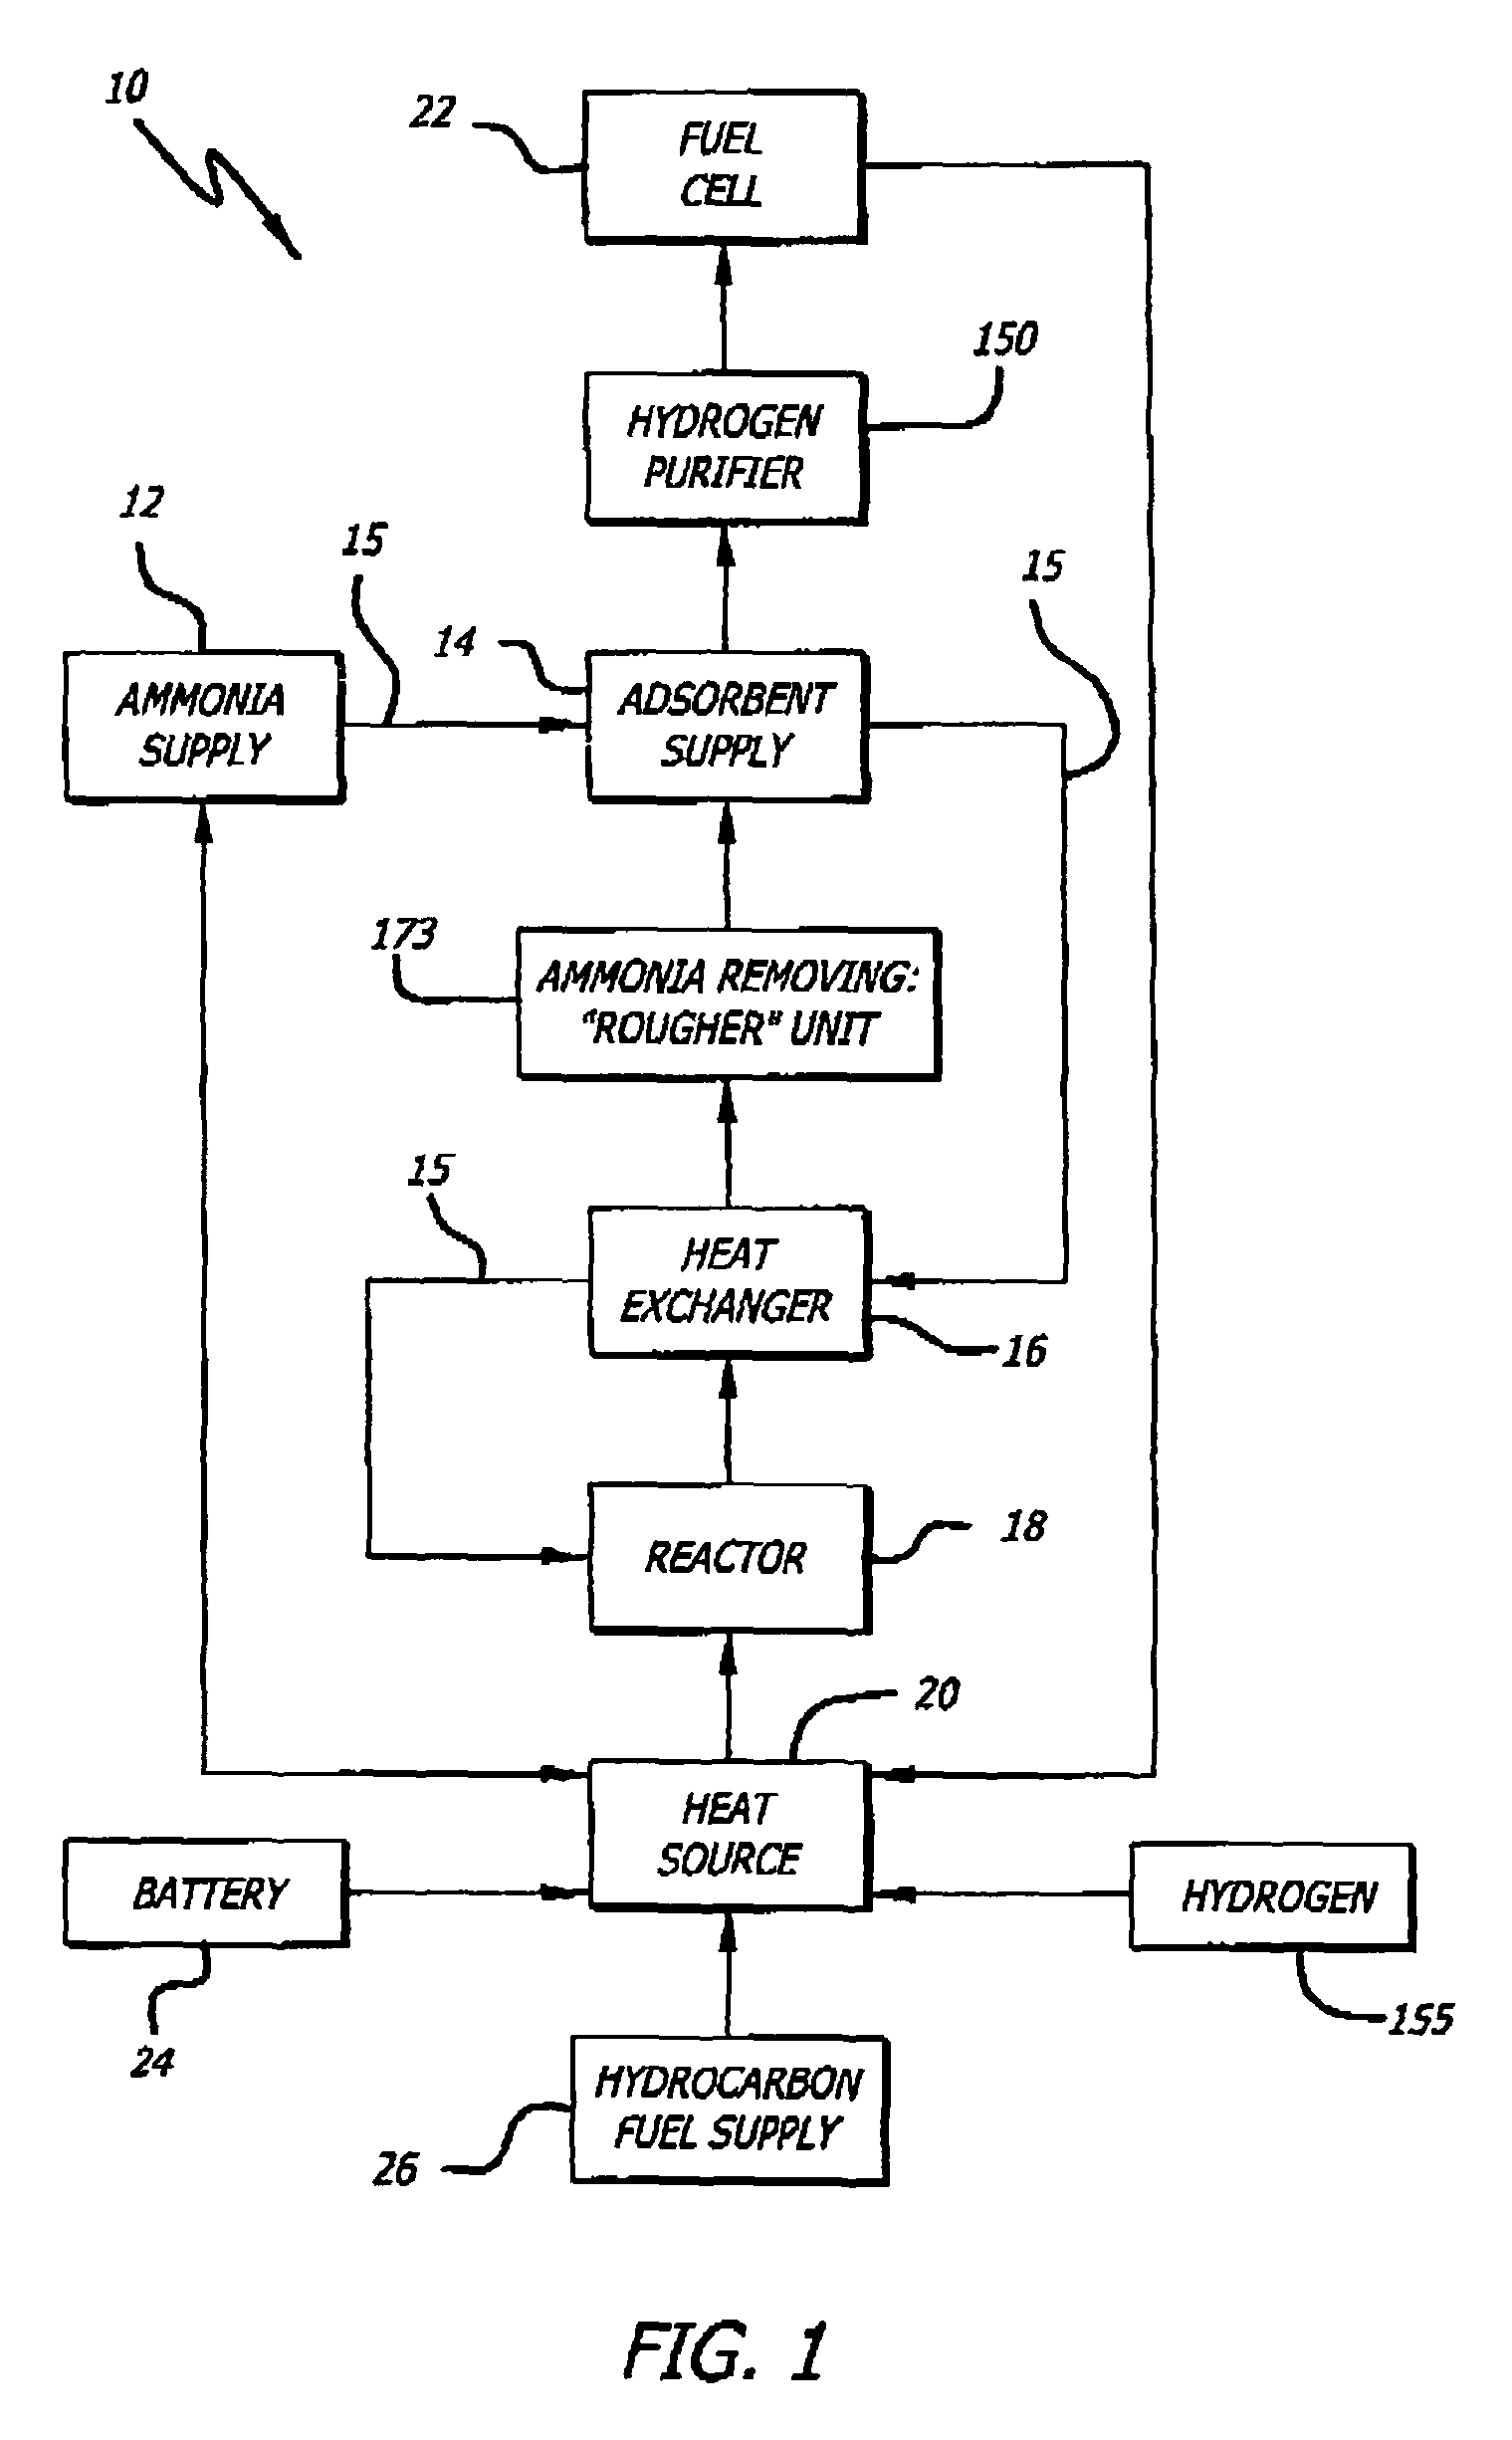 Ammonia-based hydrogen generation apparatus and method for using same